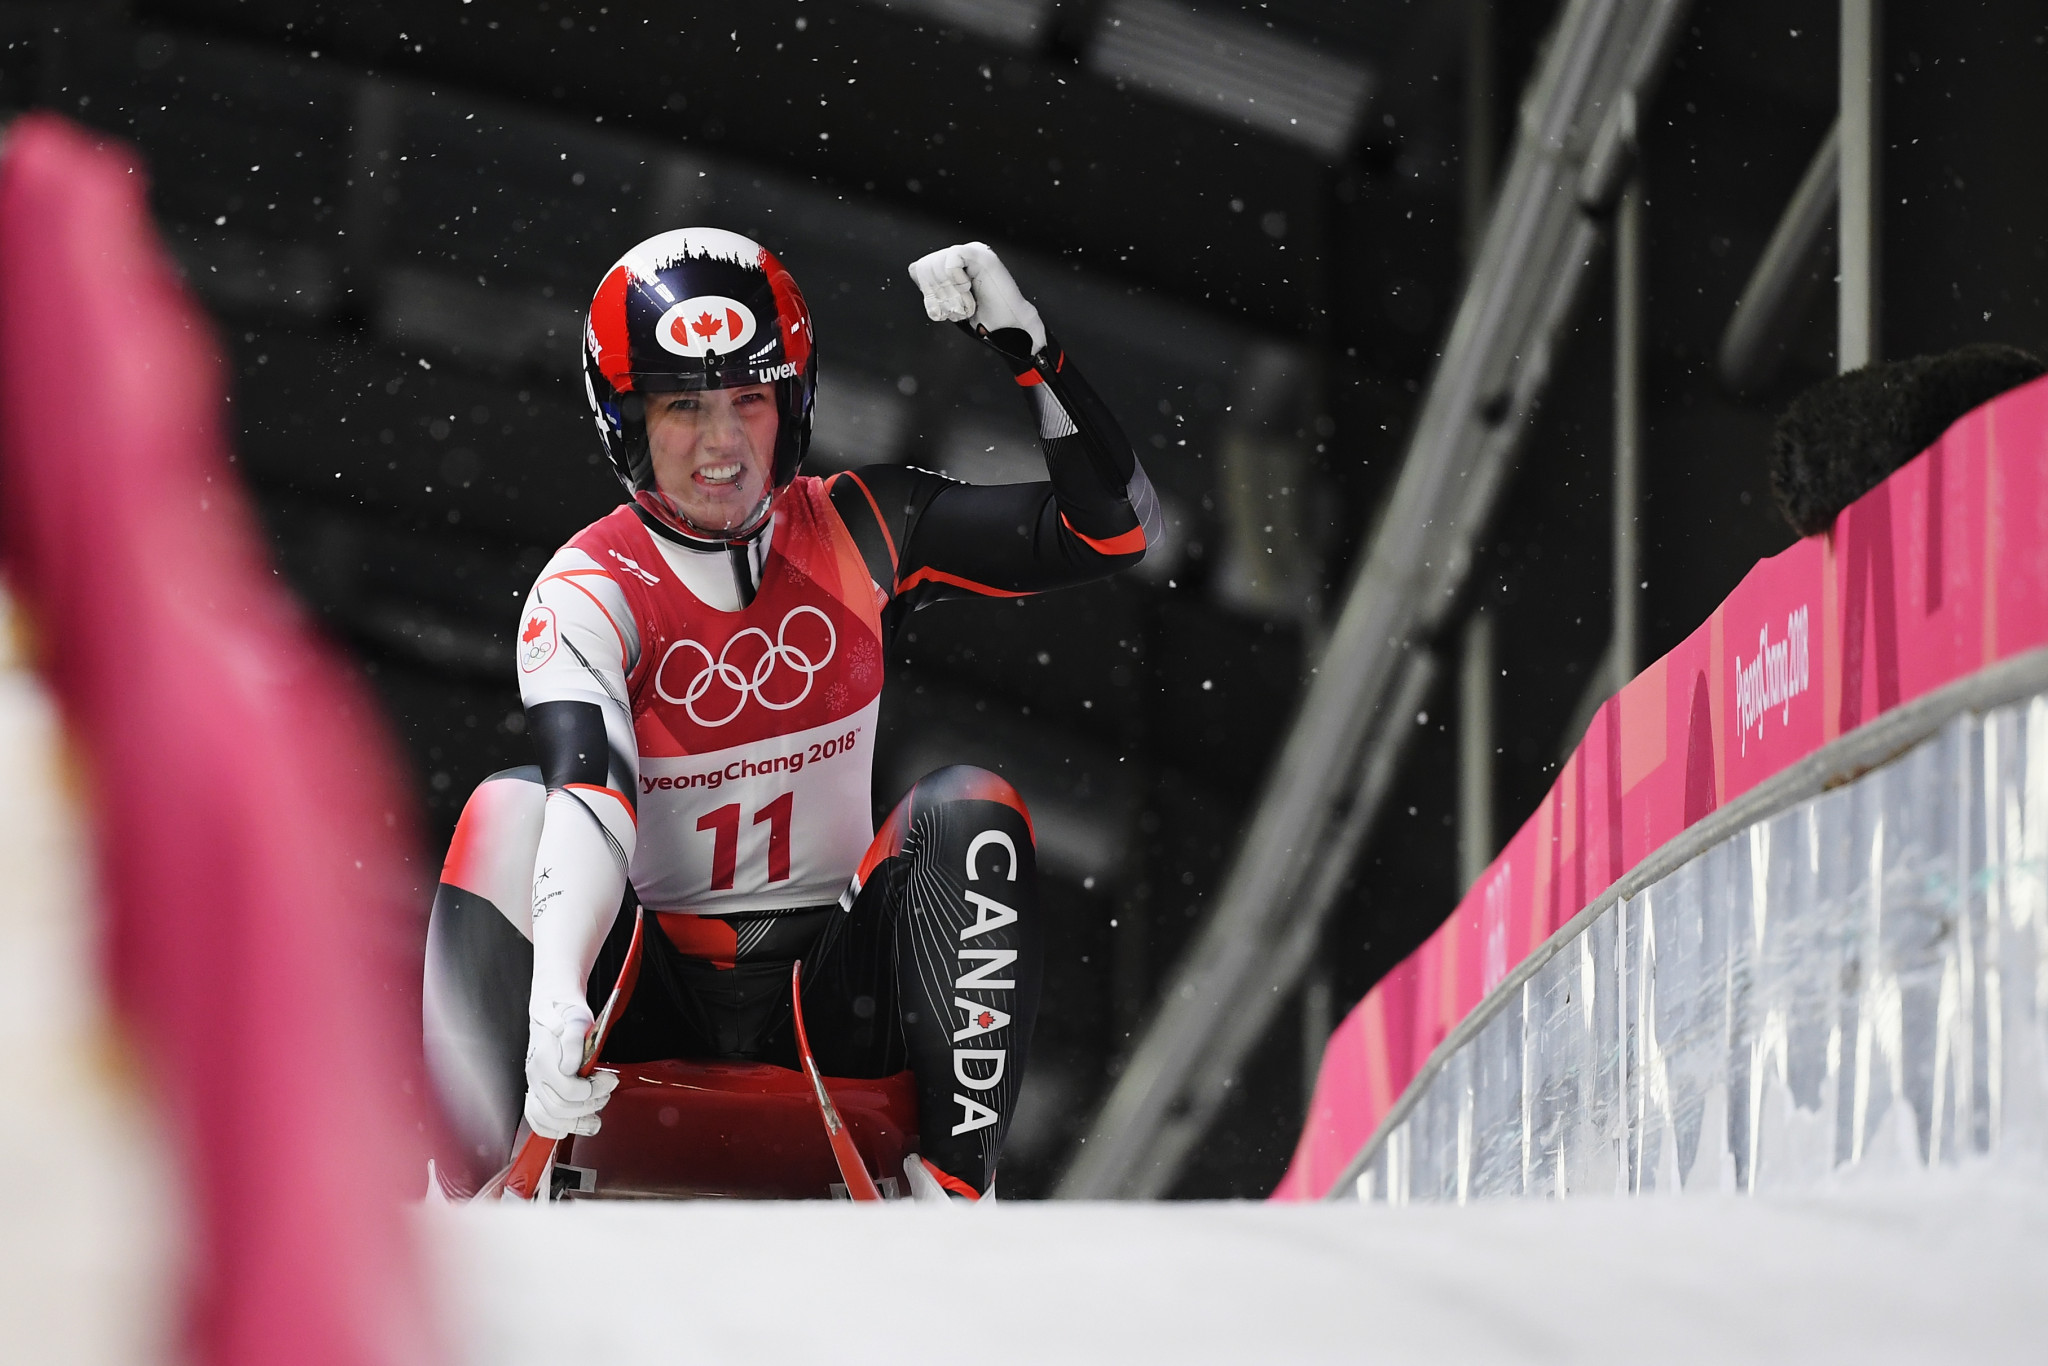 Alex Gough won an Olympic bronze medal for Canada at Pyeongchang 2018 during Wolfgang Staudinger's time as head coach ©Getty Images